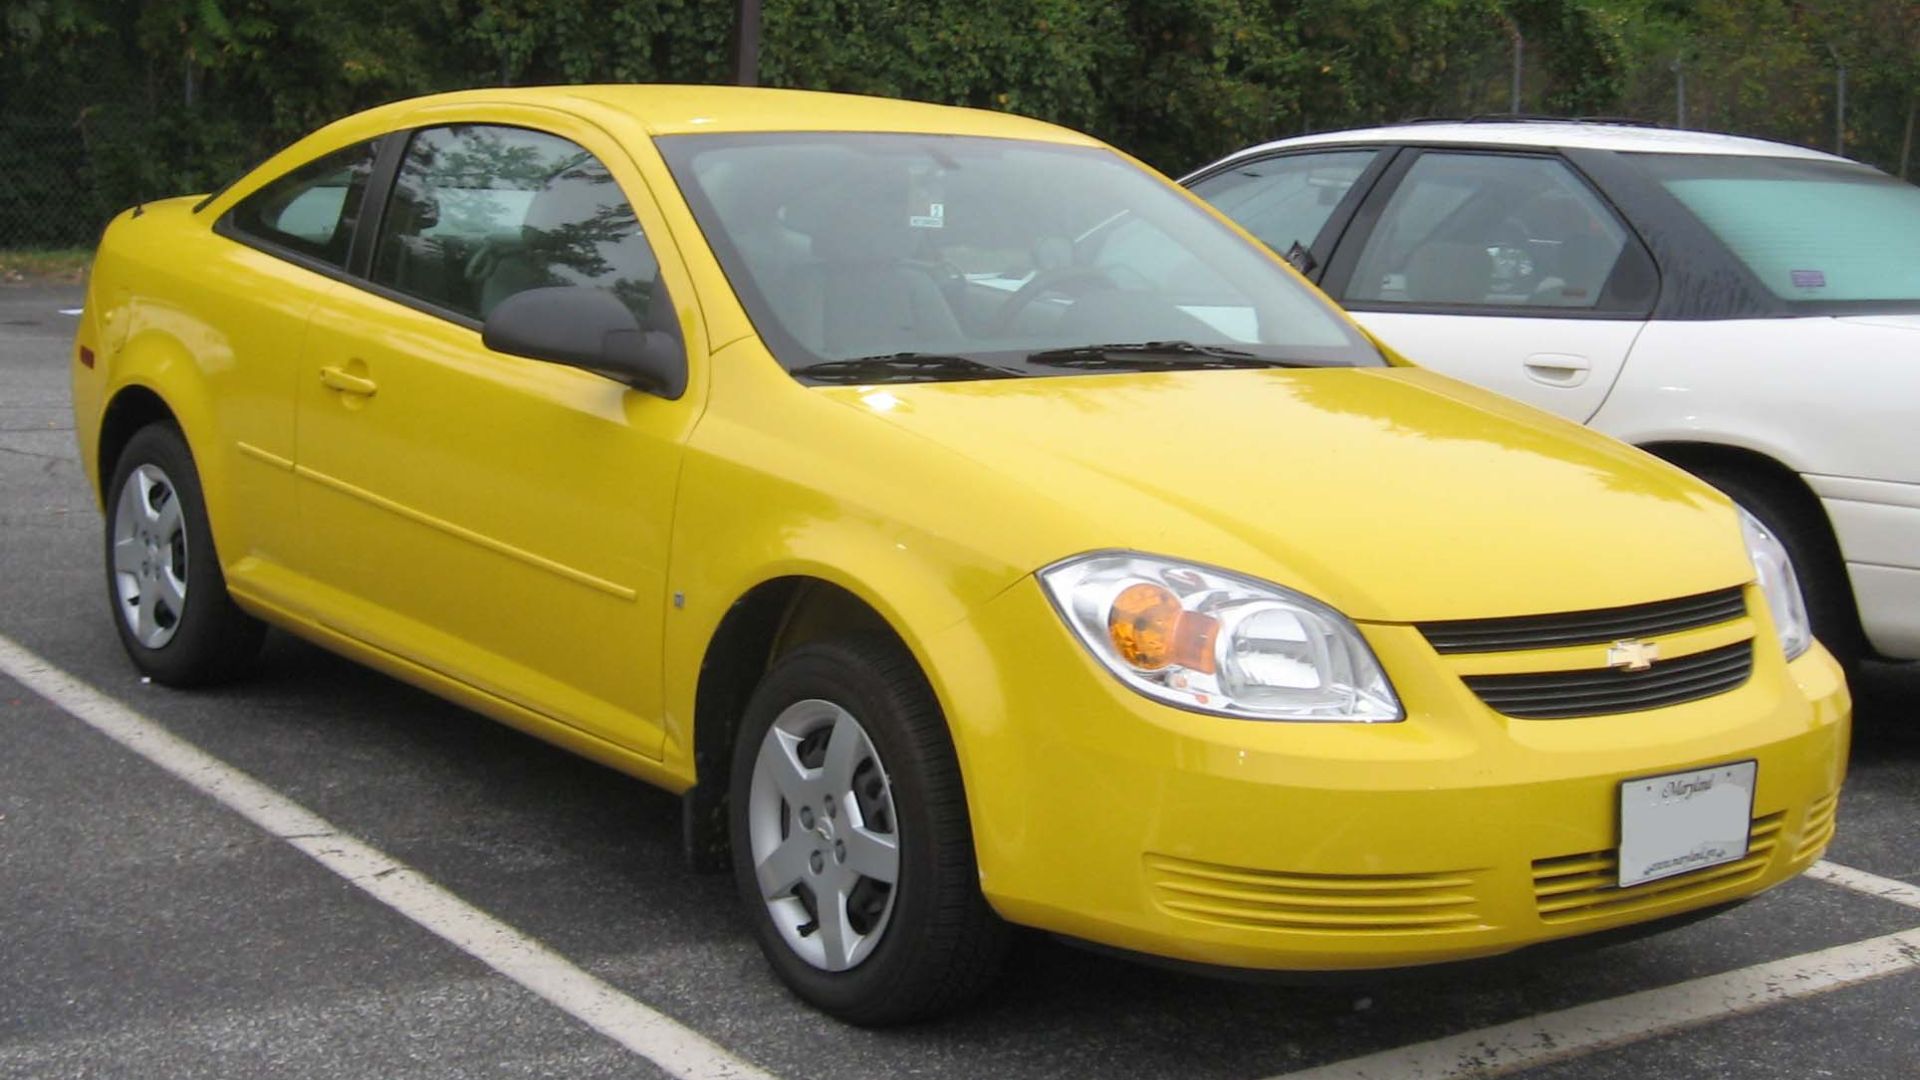 a yellow car is parked in a parking lot.